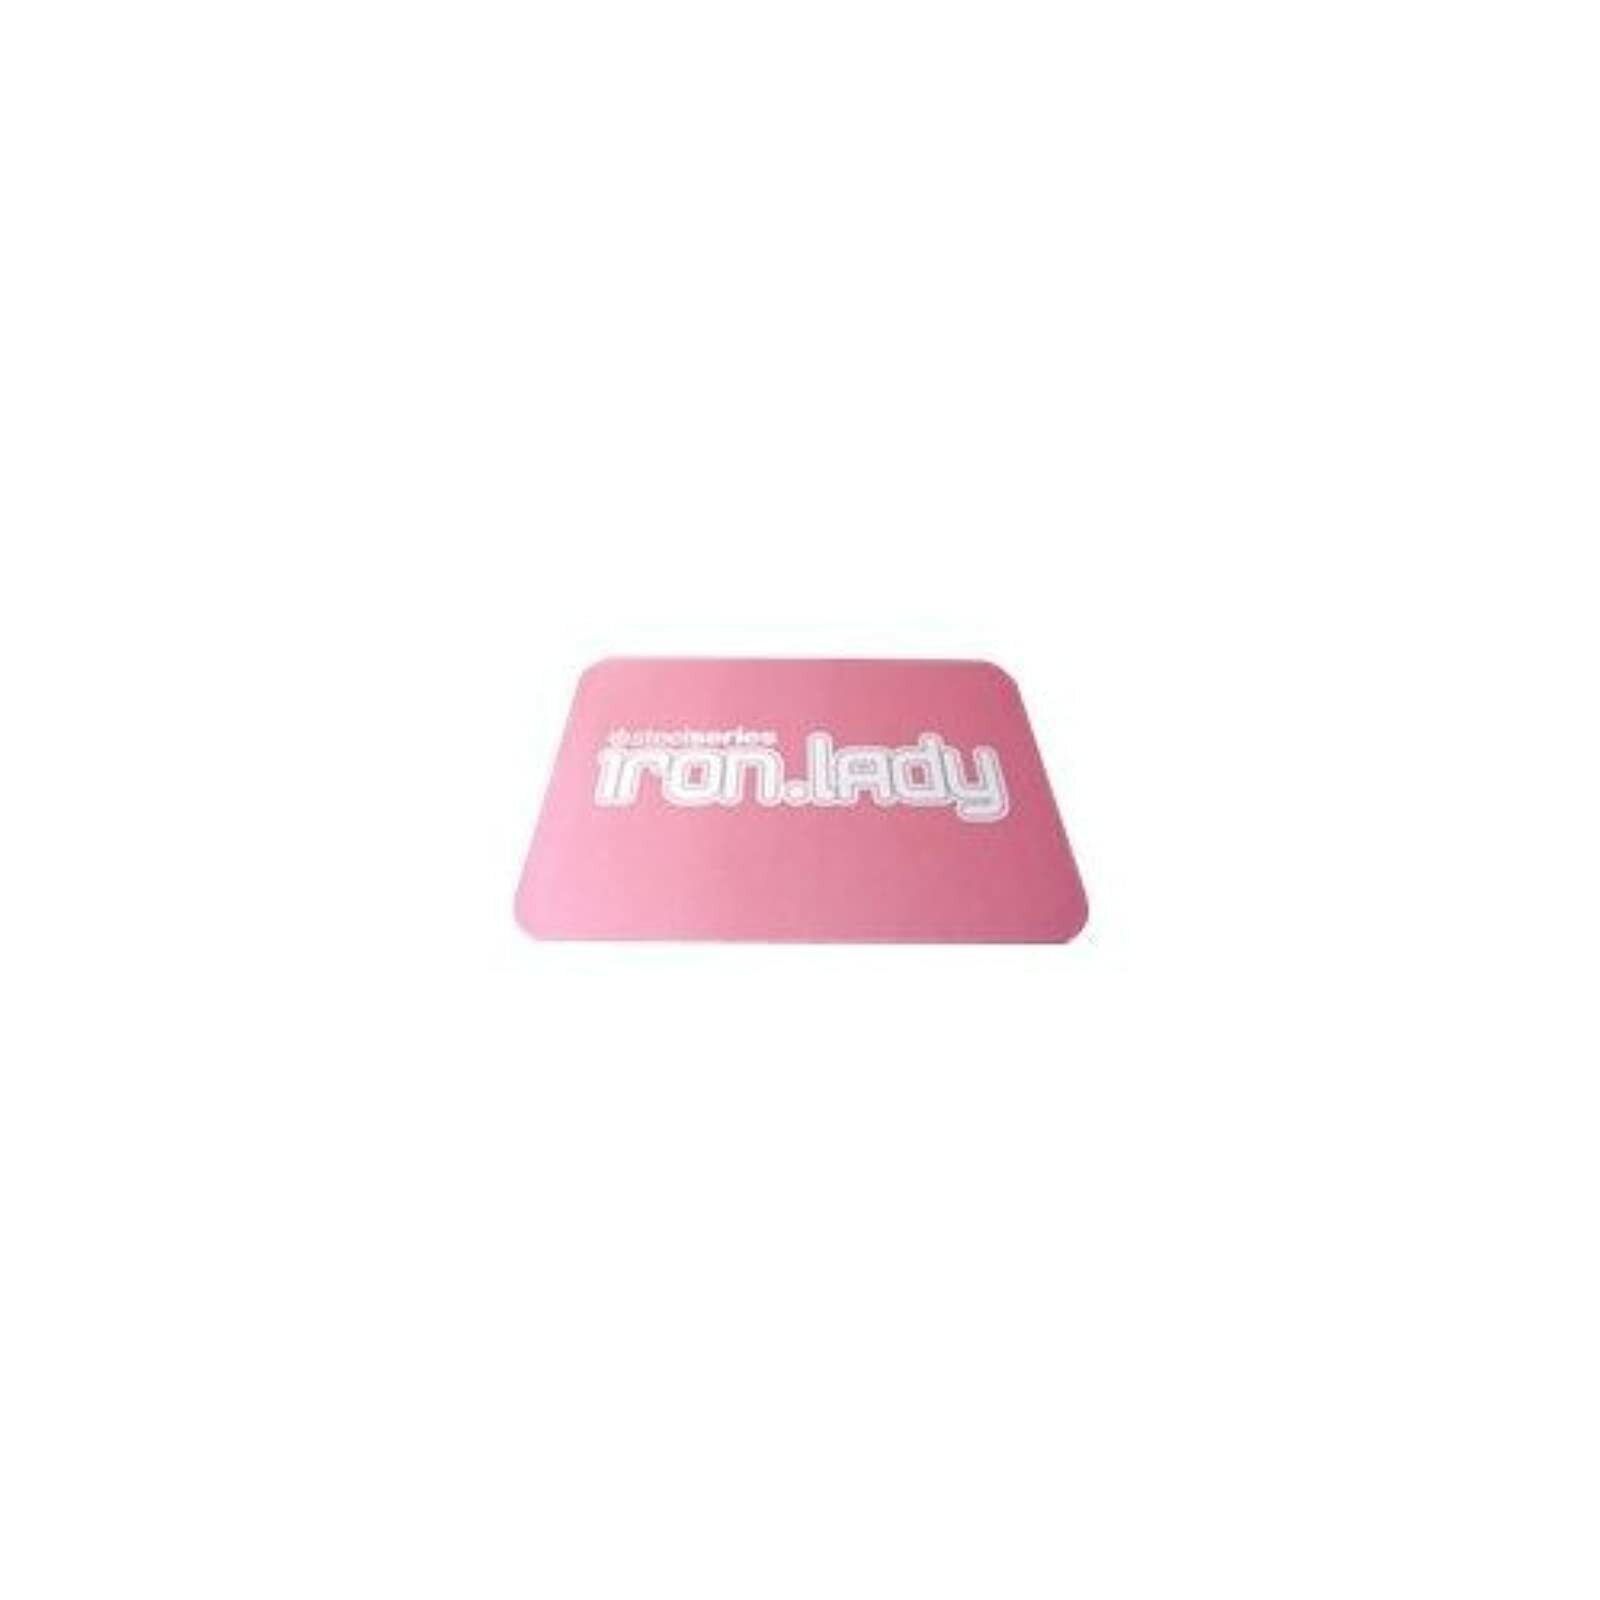 Steelseries Gaming Iron Lady Qck Mousepad Pink Brand New